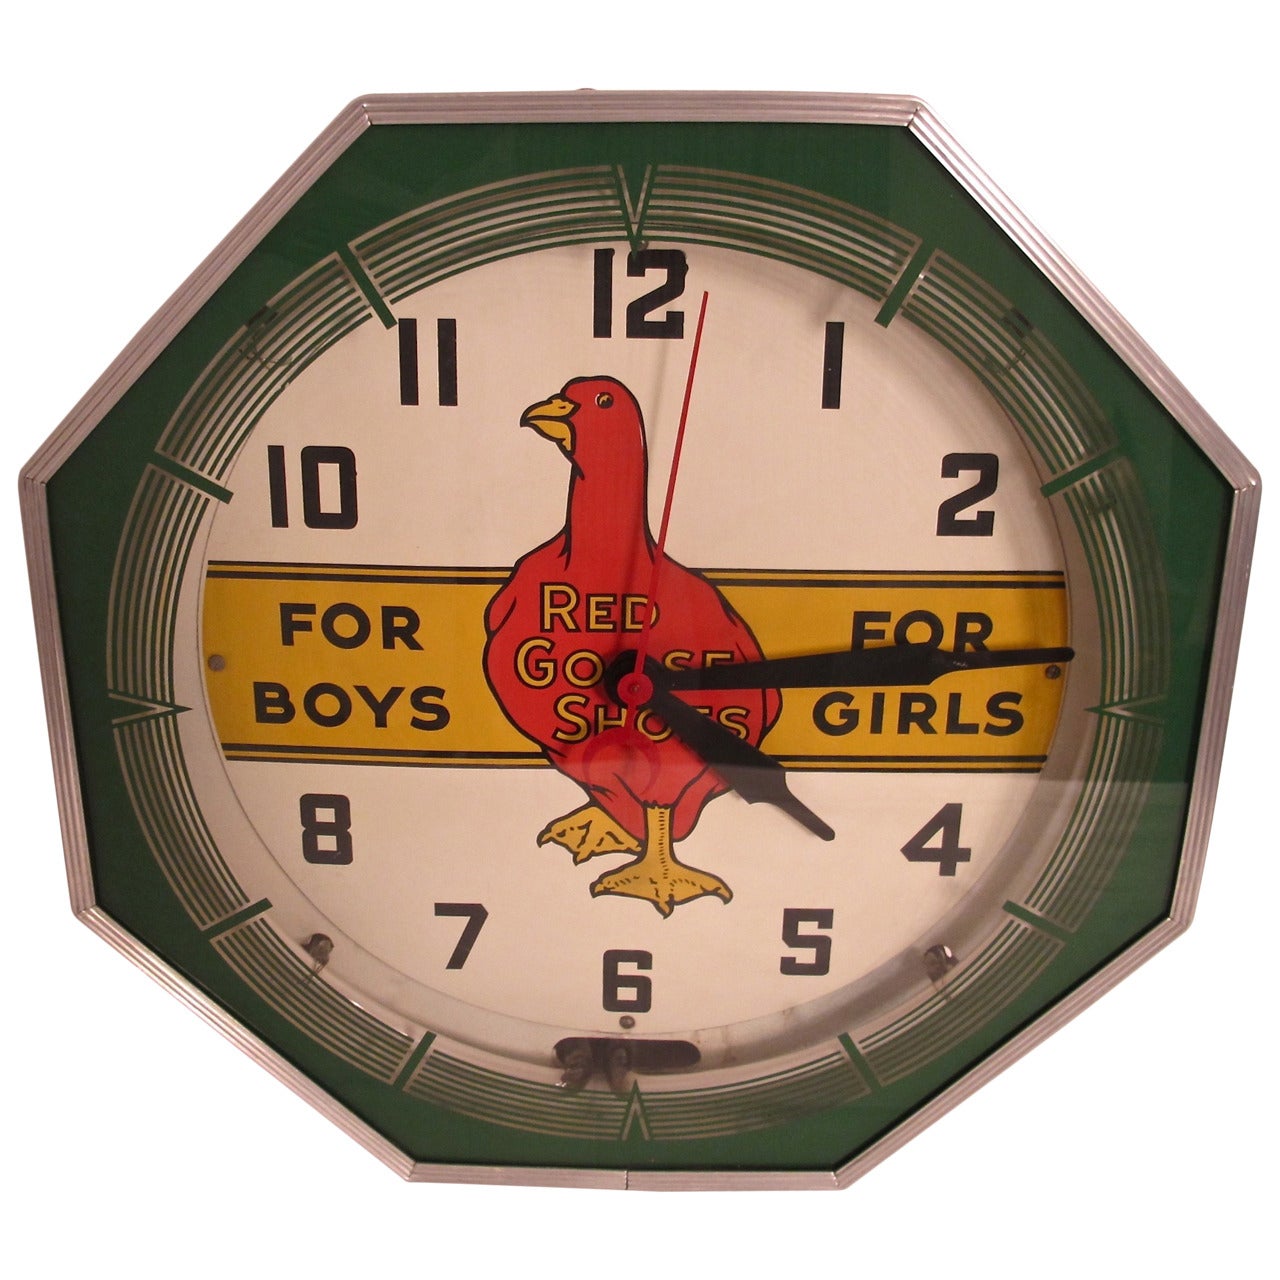 Vintage "Red Goose Shoes" Neon Clock